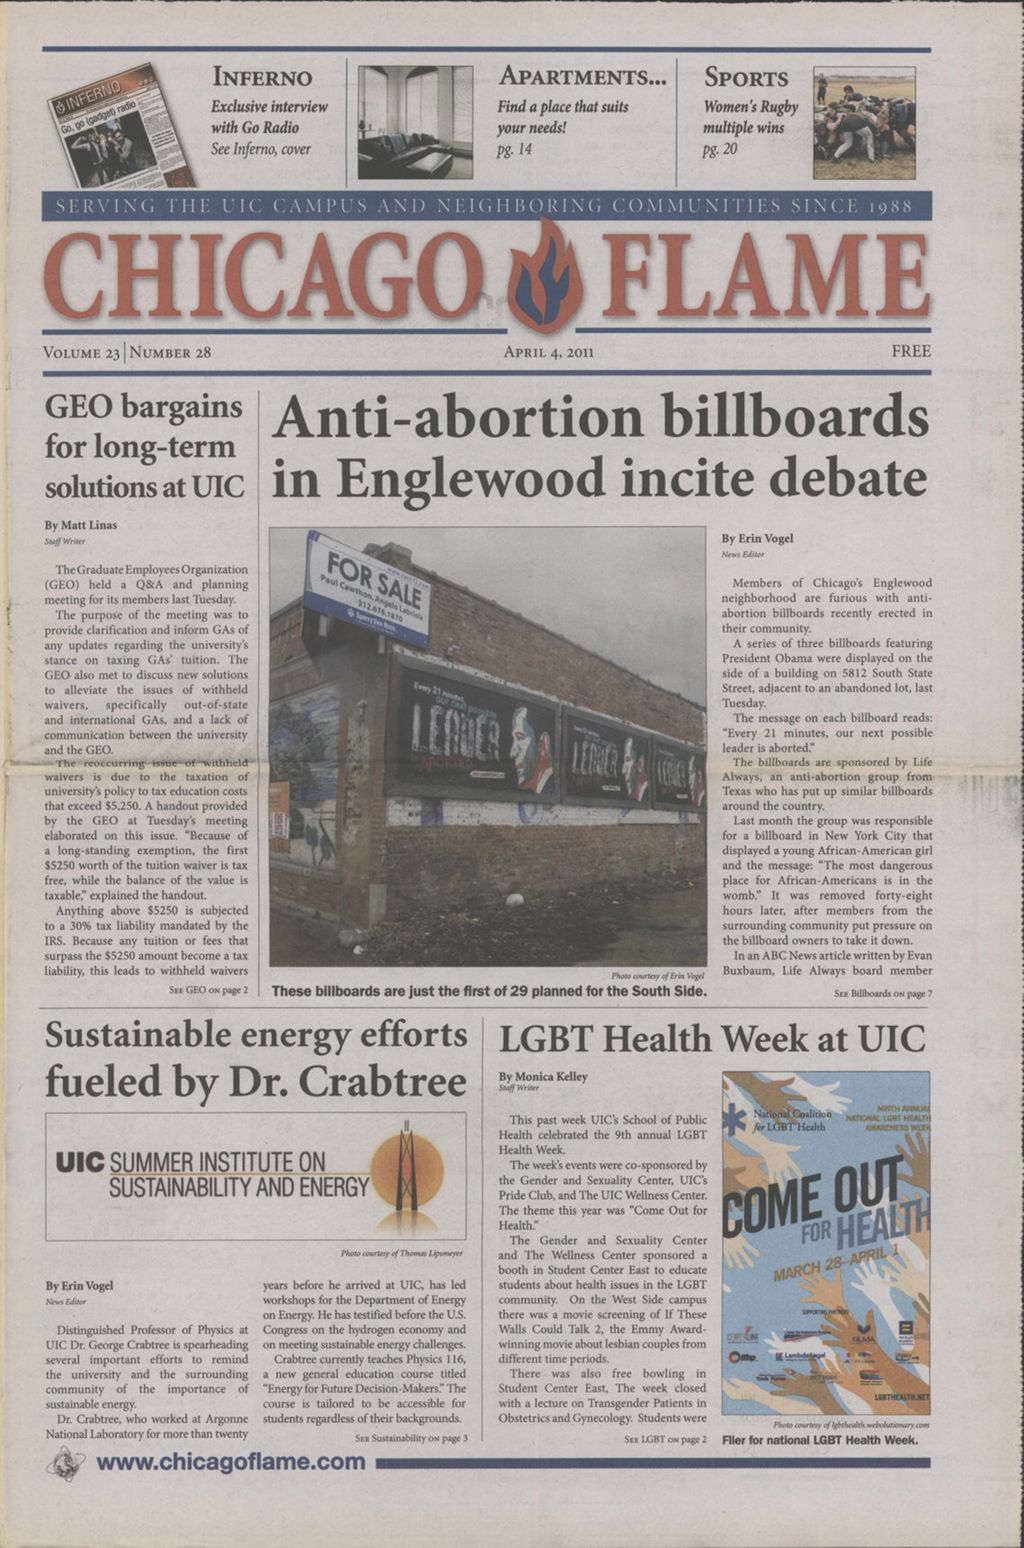 Miniature of Chicago Flame (April 4, 2011)